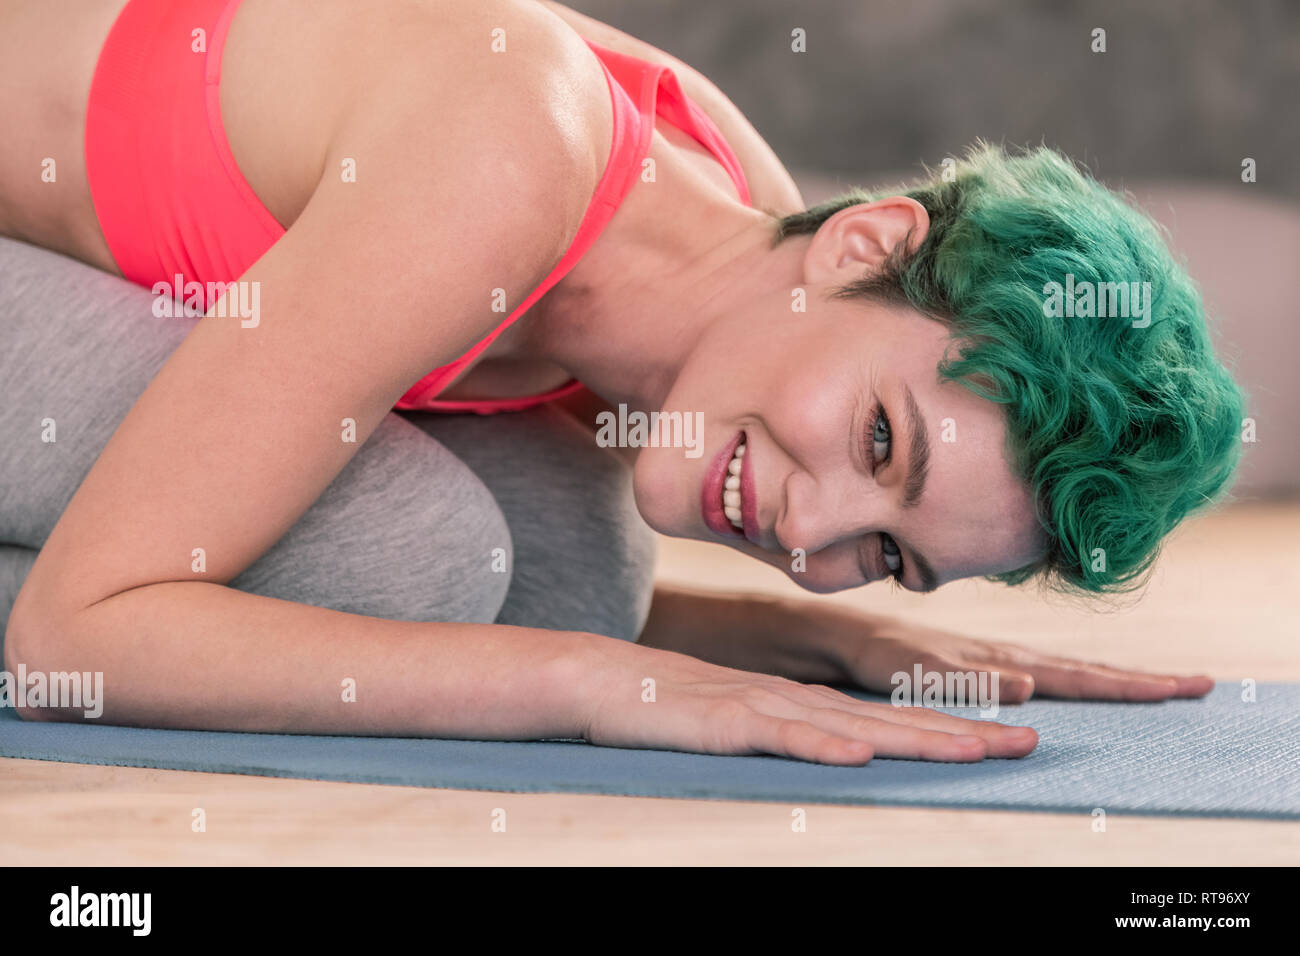 Green-haired woman wearing pink top working out on sport mat Stock Photo